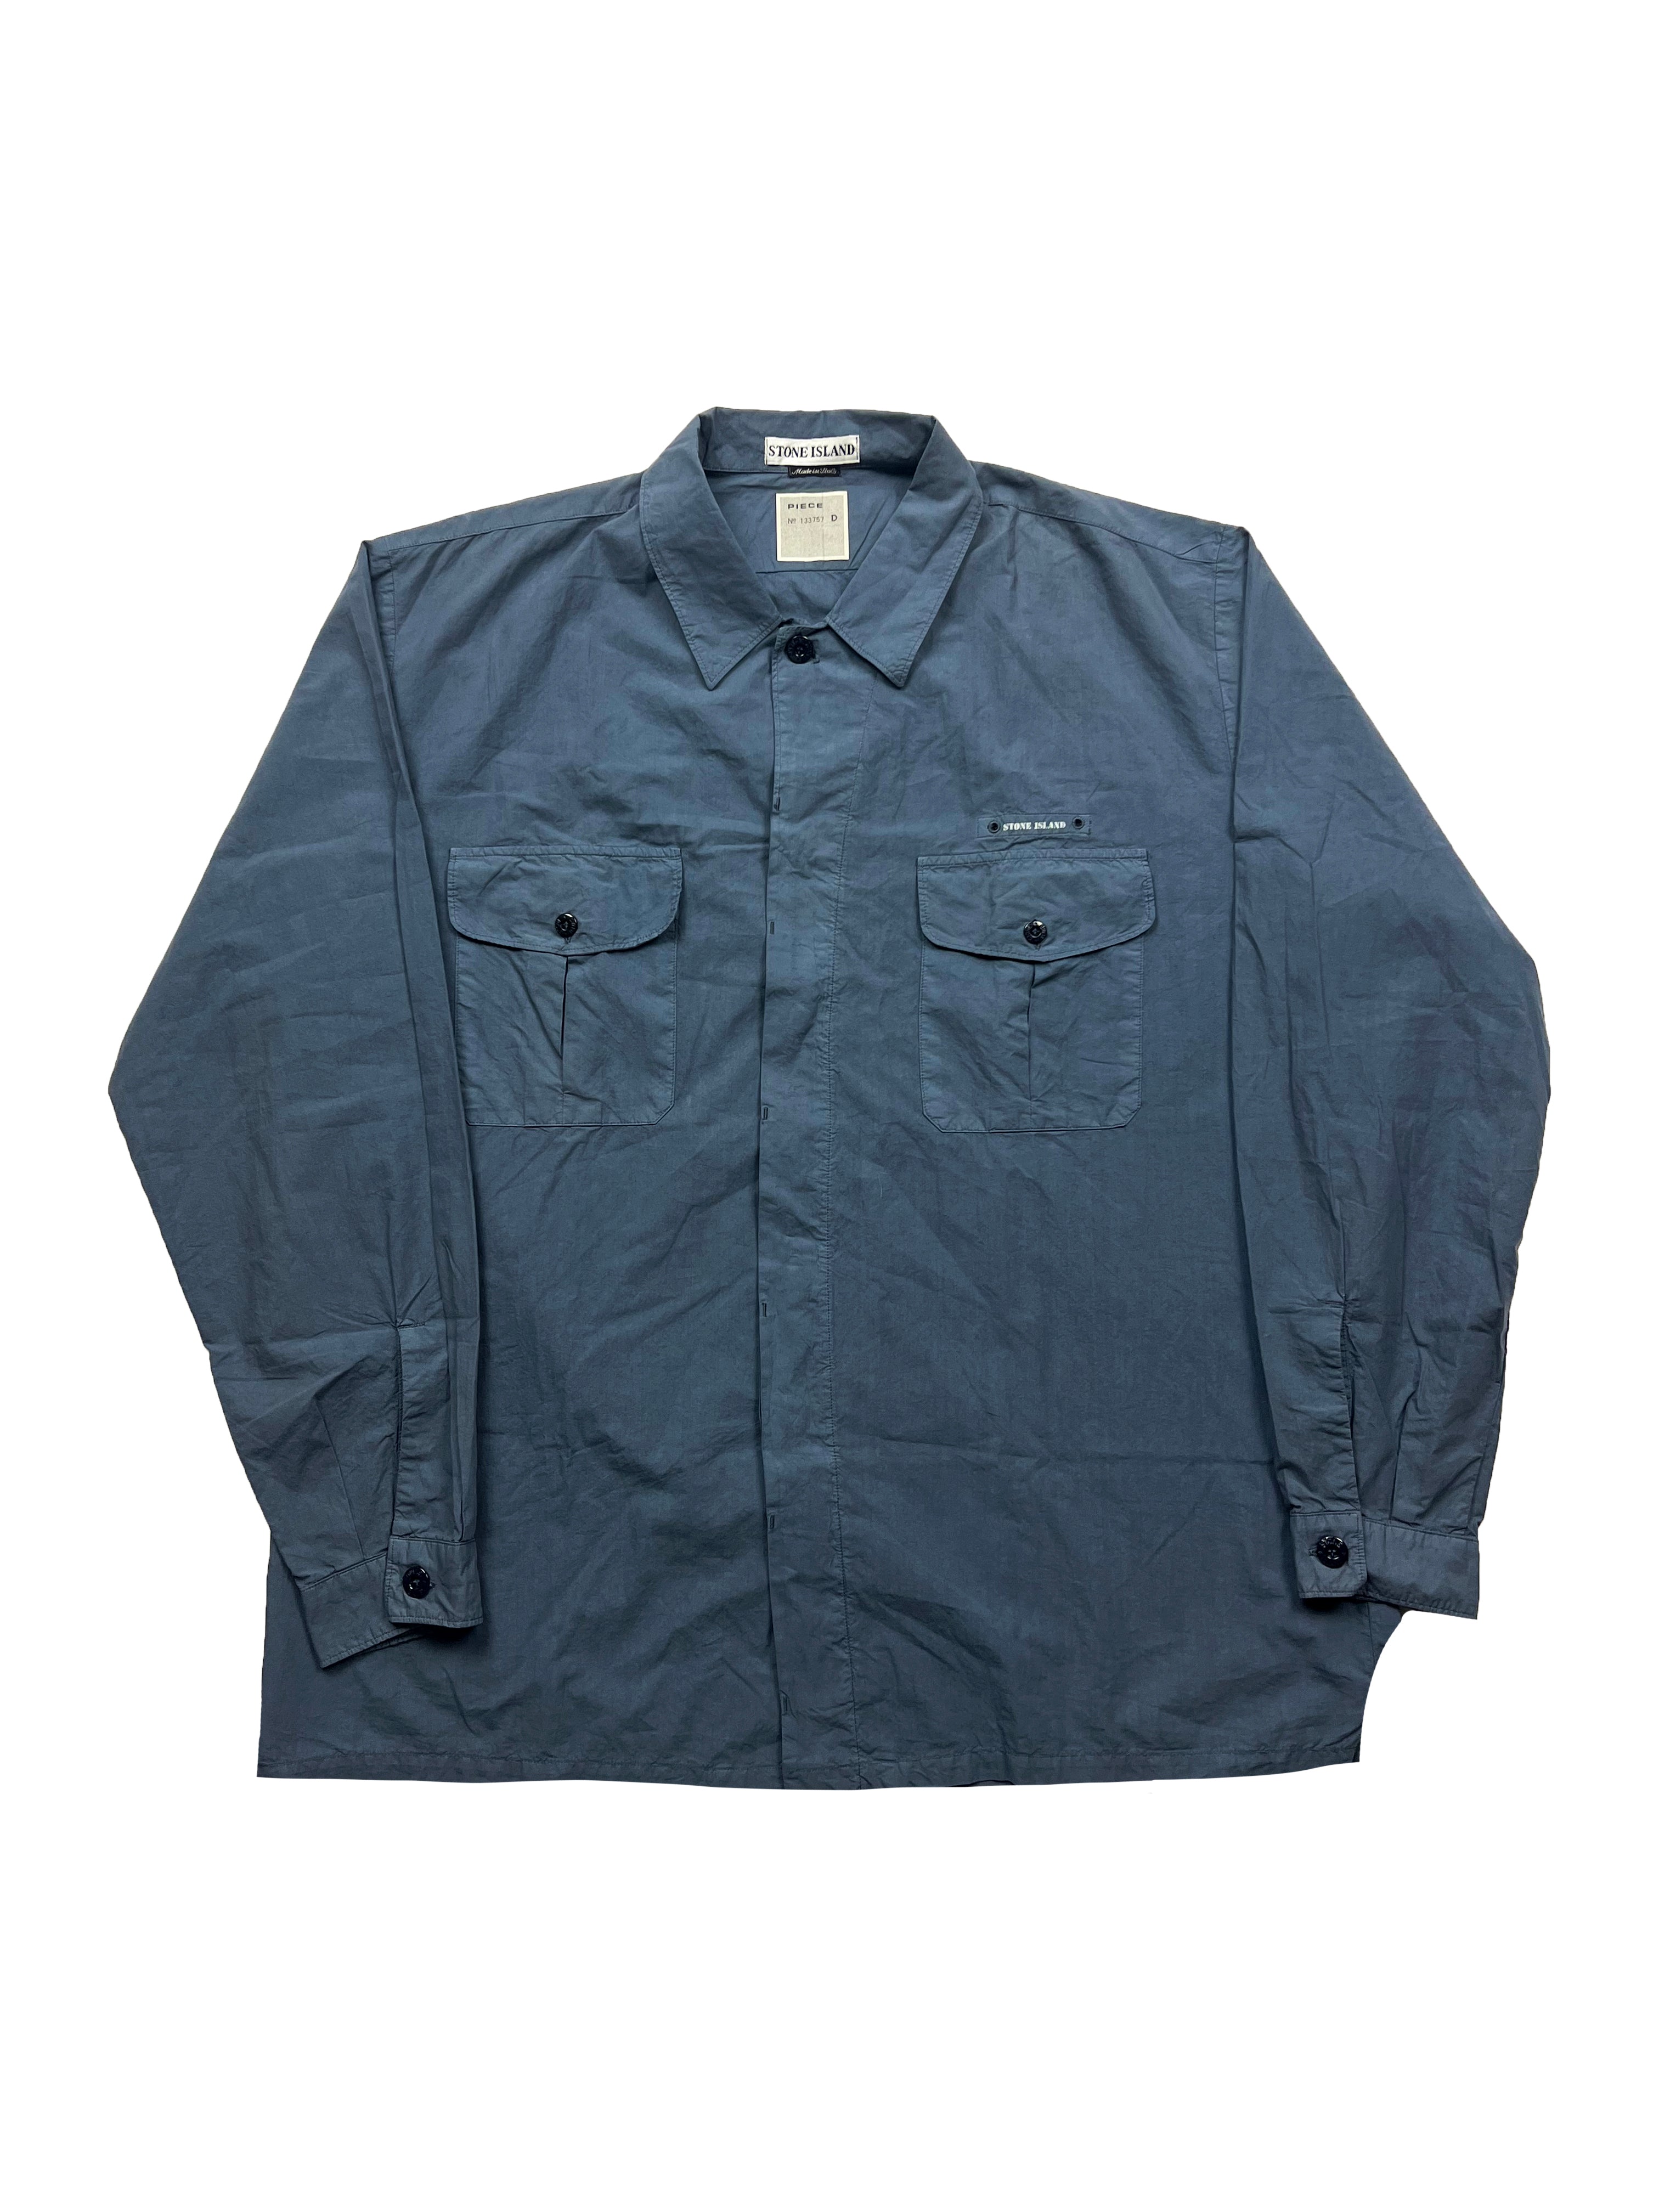 Stone island Light Blue Spell Out Overshirt 1998